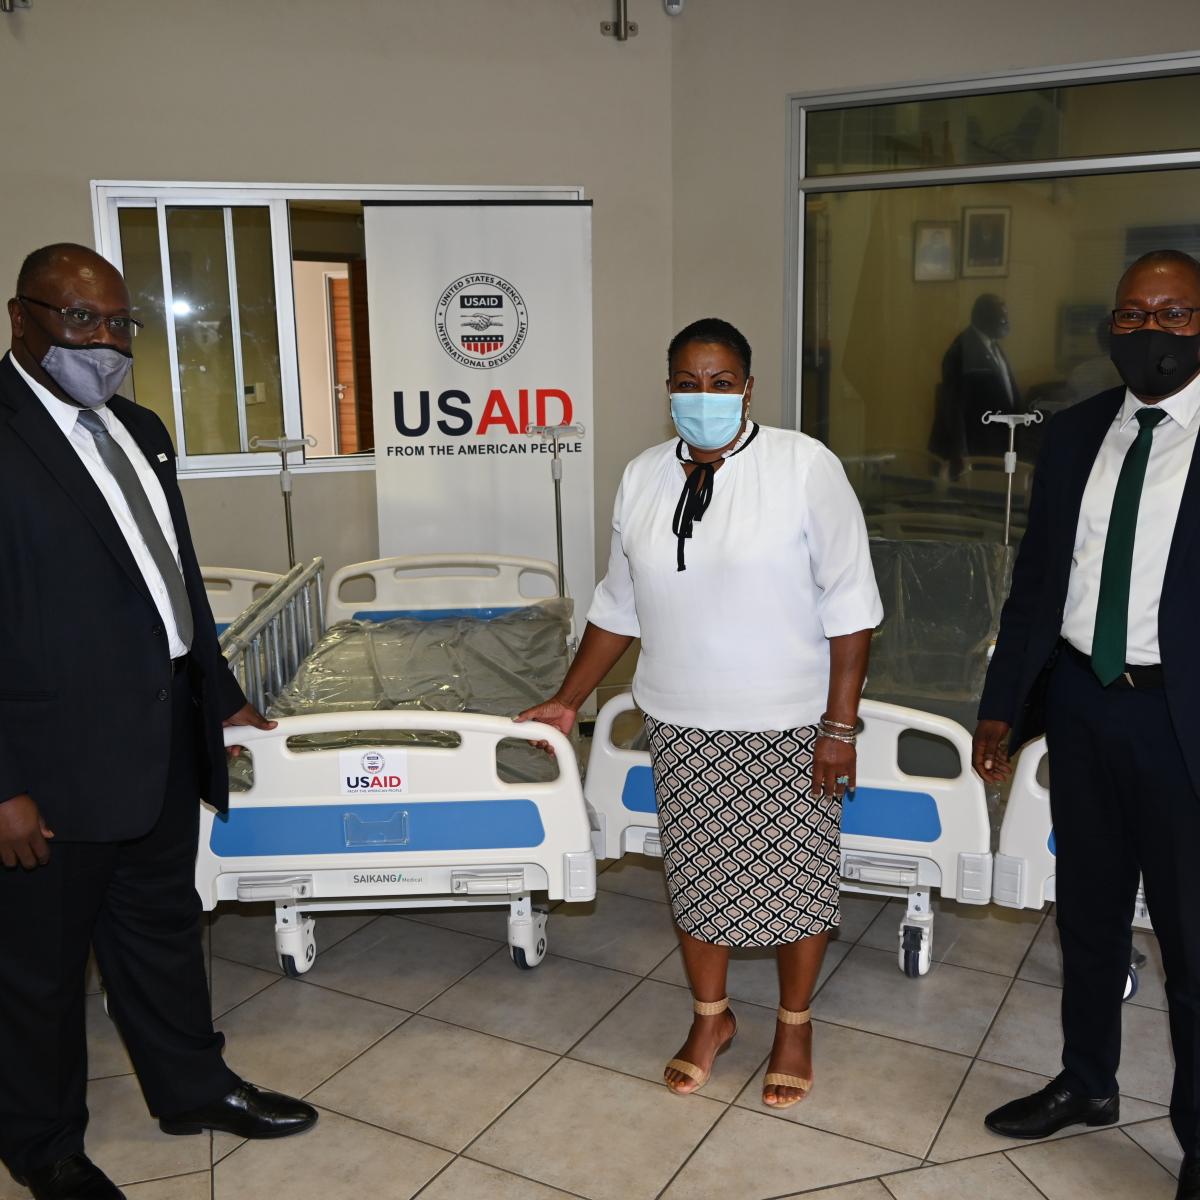 At the handover of 70 ICU beds donated by the United States to Namibia (from left to right): McDonald Homer, USAID Country Representative, Hon. Dr. Esther Muinjangue, Deputy Minister of Health and Social Services, and Ben Nangombe, Executive Director of the Ministry of Health and Social Services.